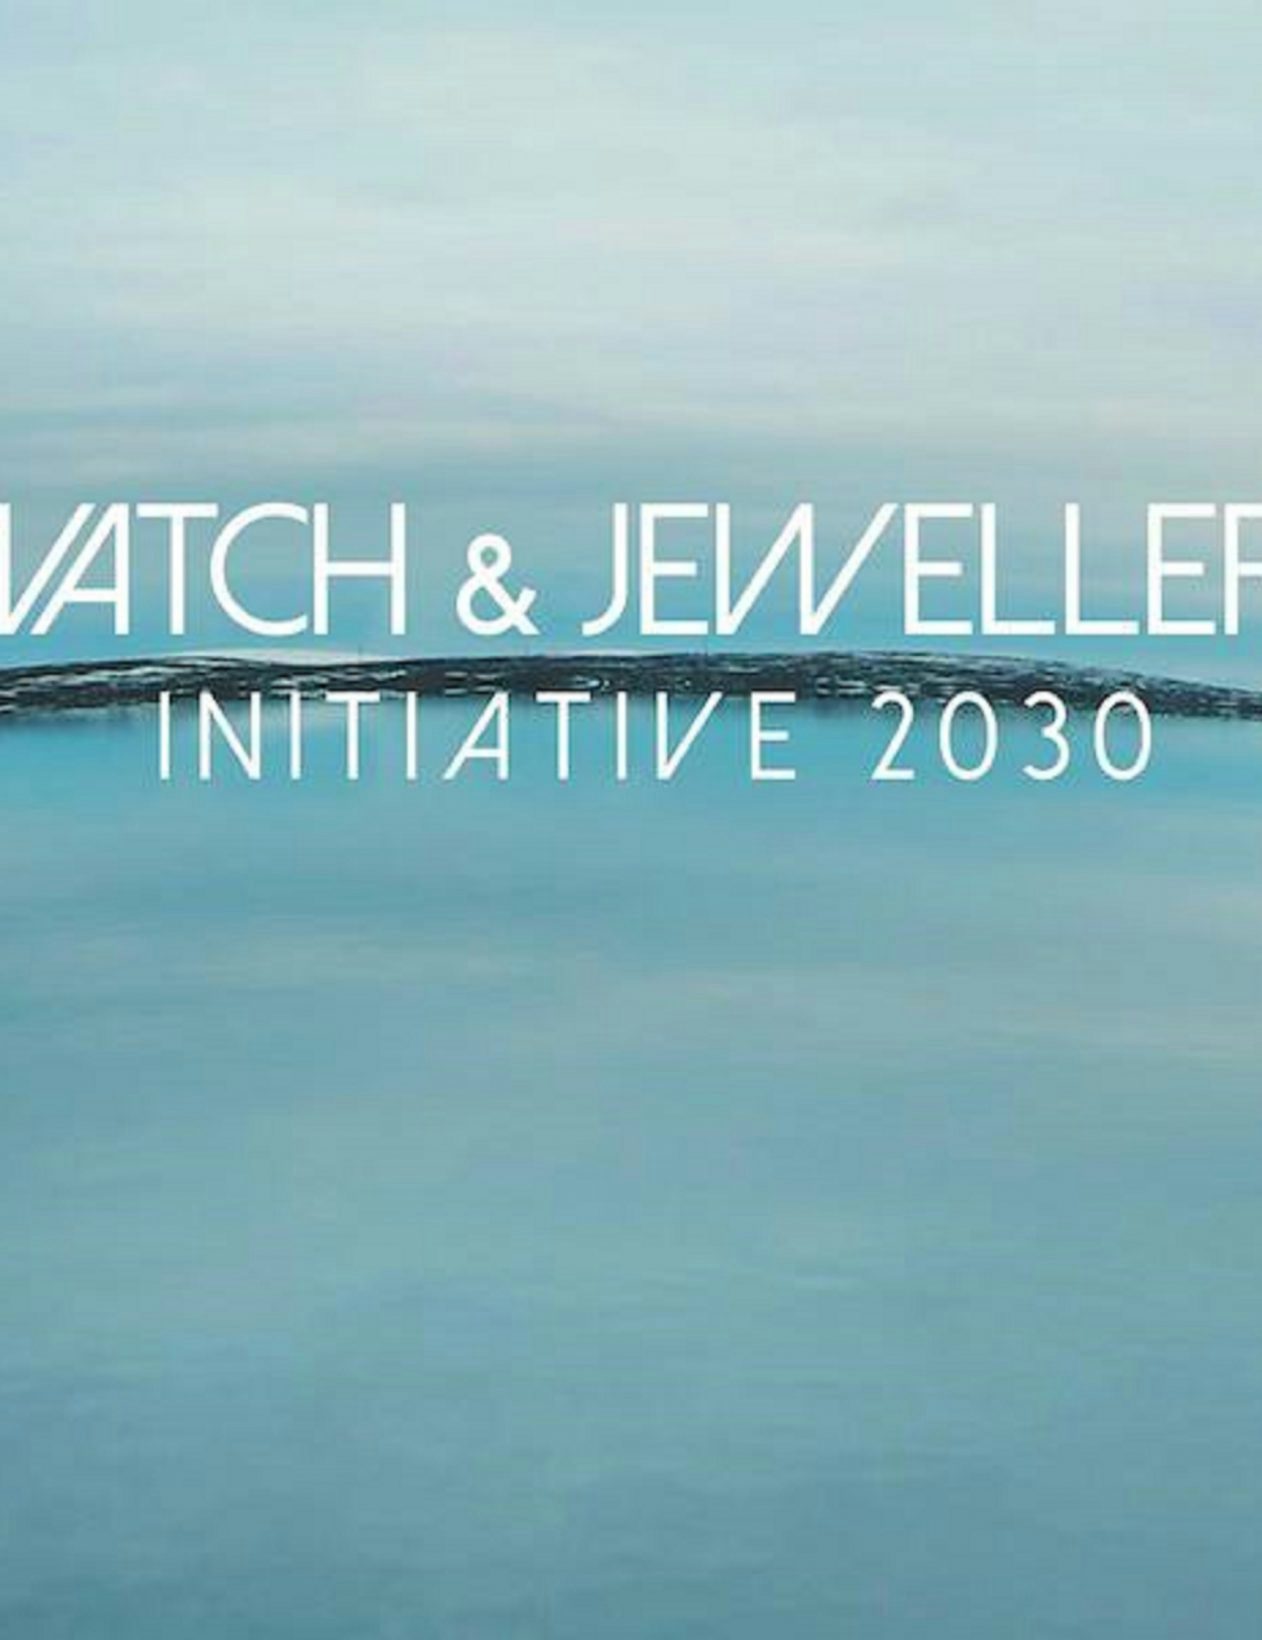 New members join the Watch & Jewellery Initiative 2030